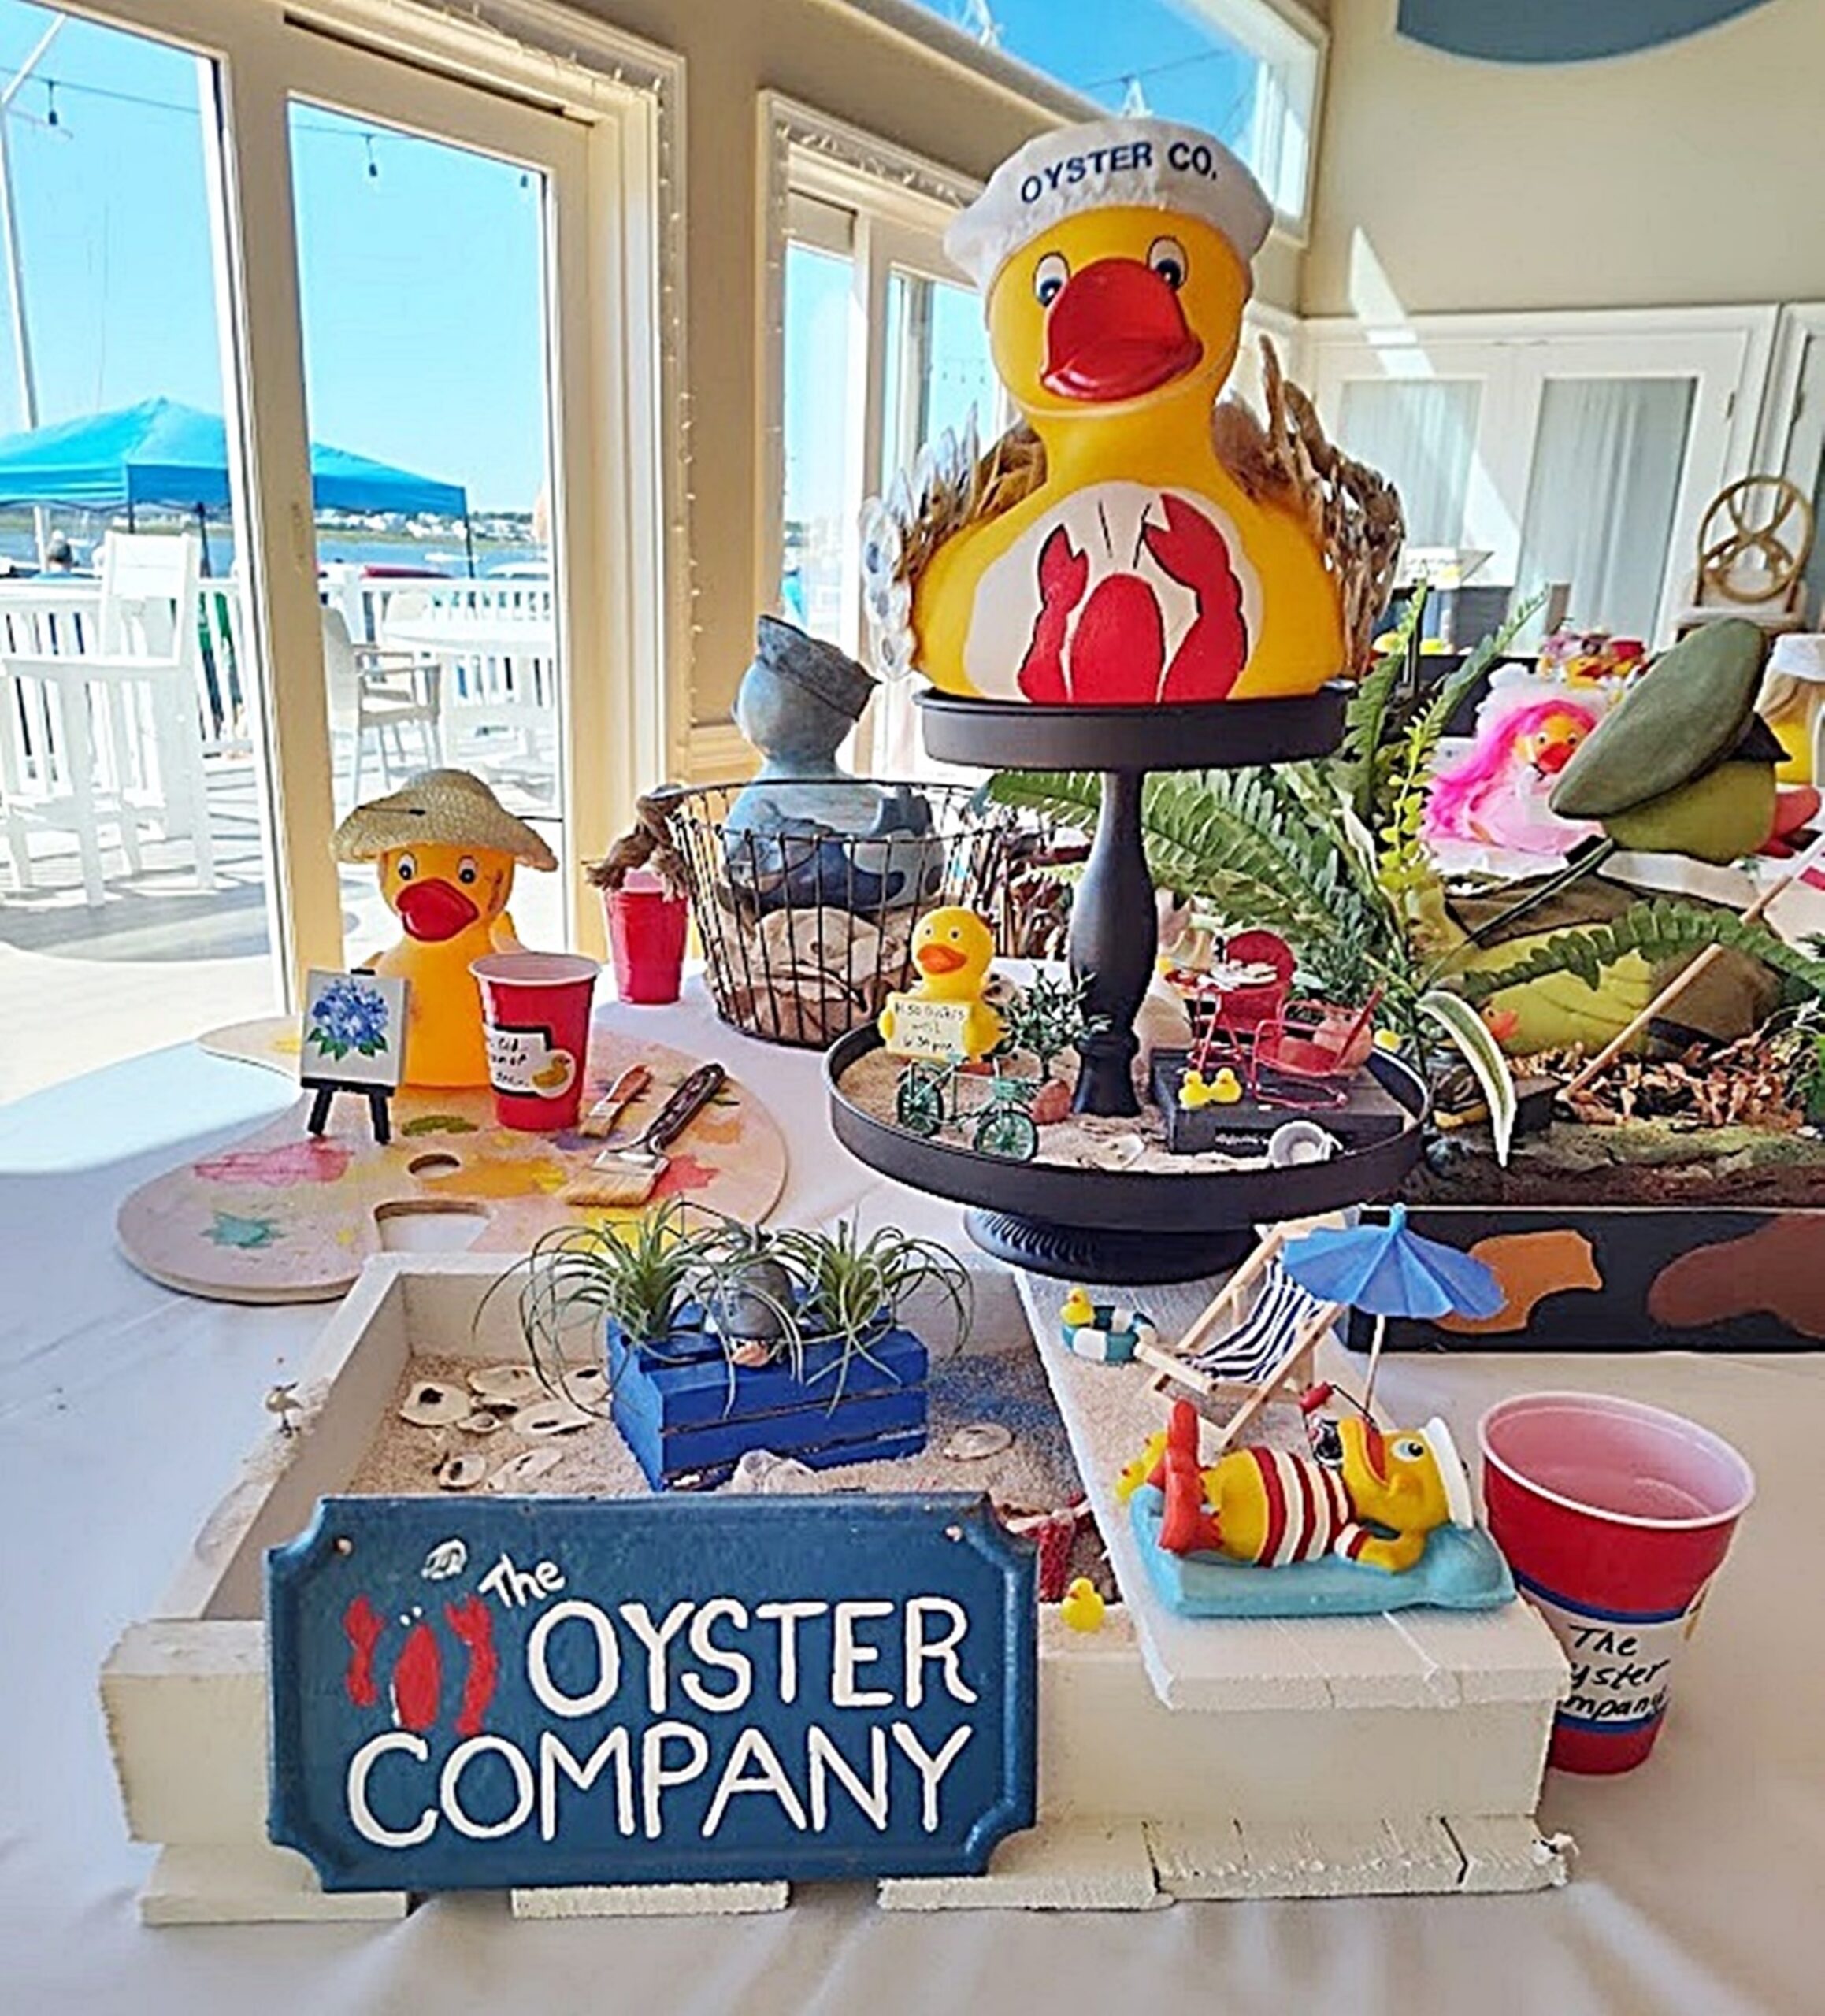 The Oyster Company's winning Decked-Out Duck